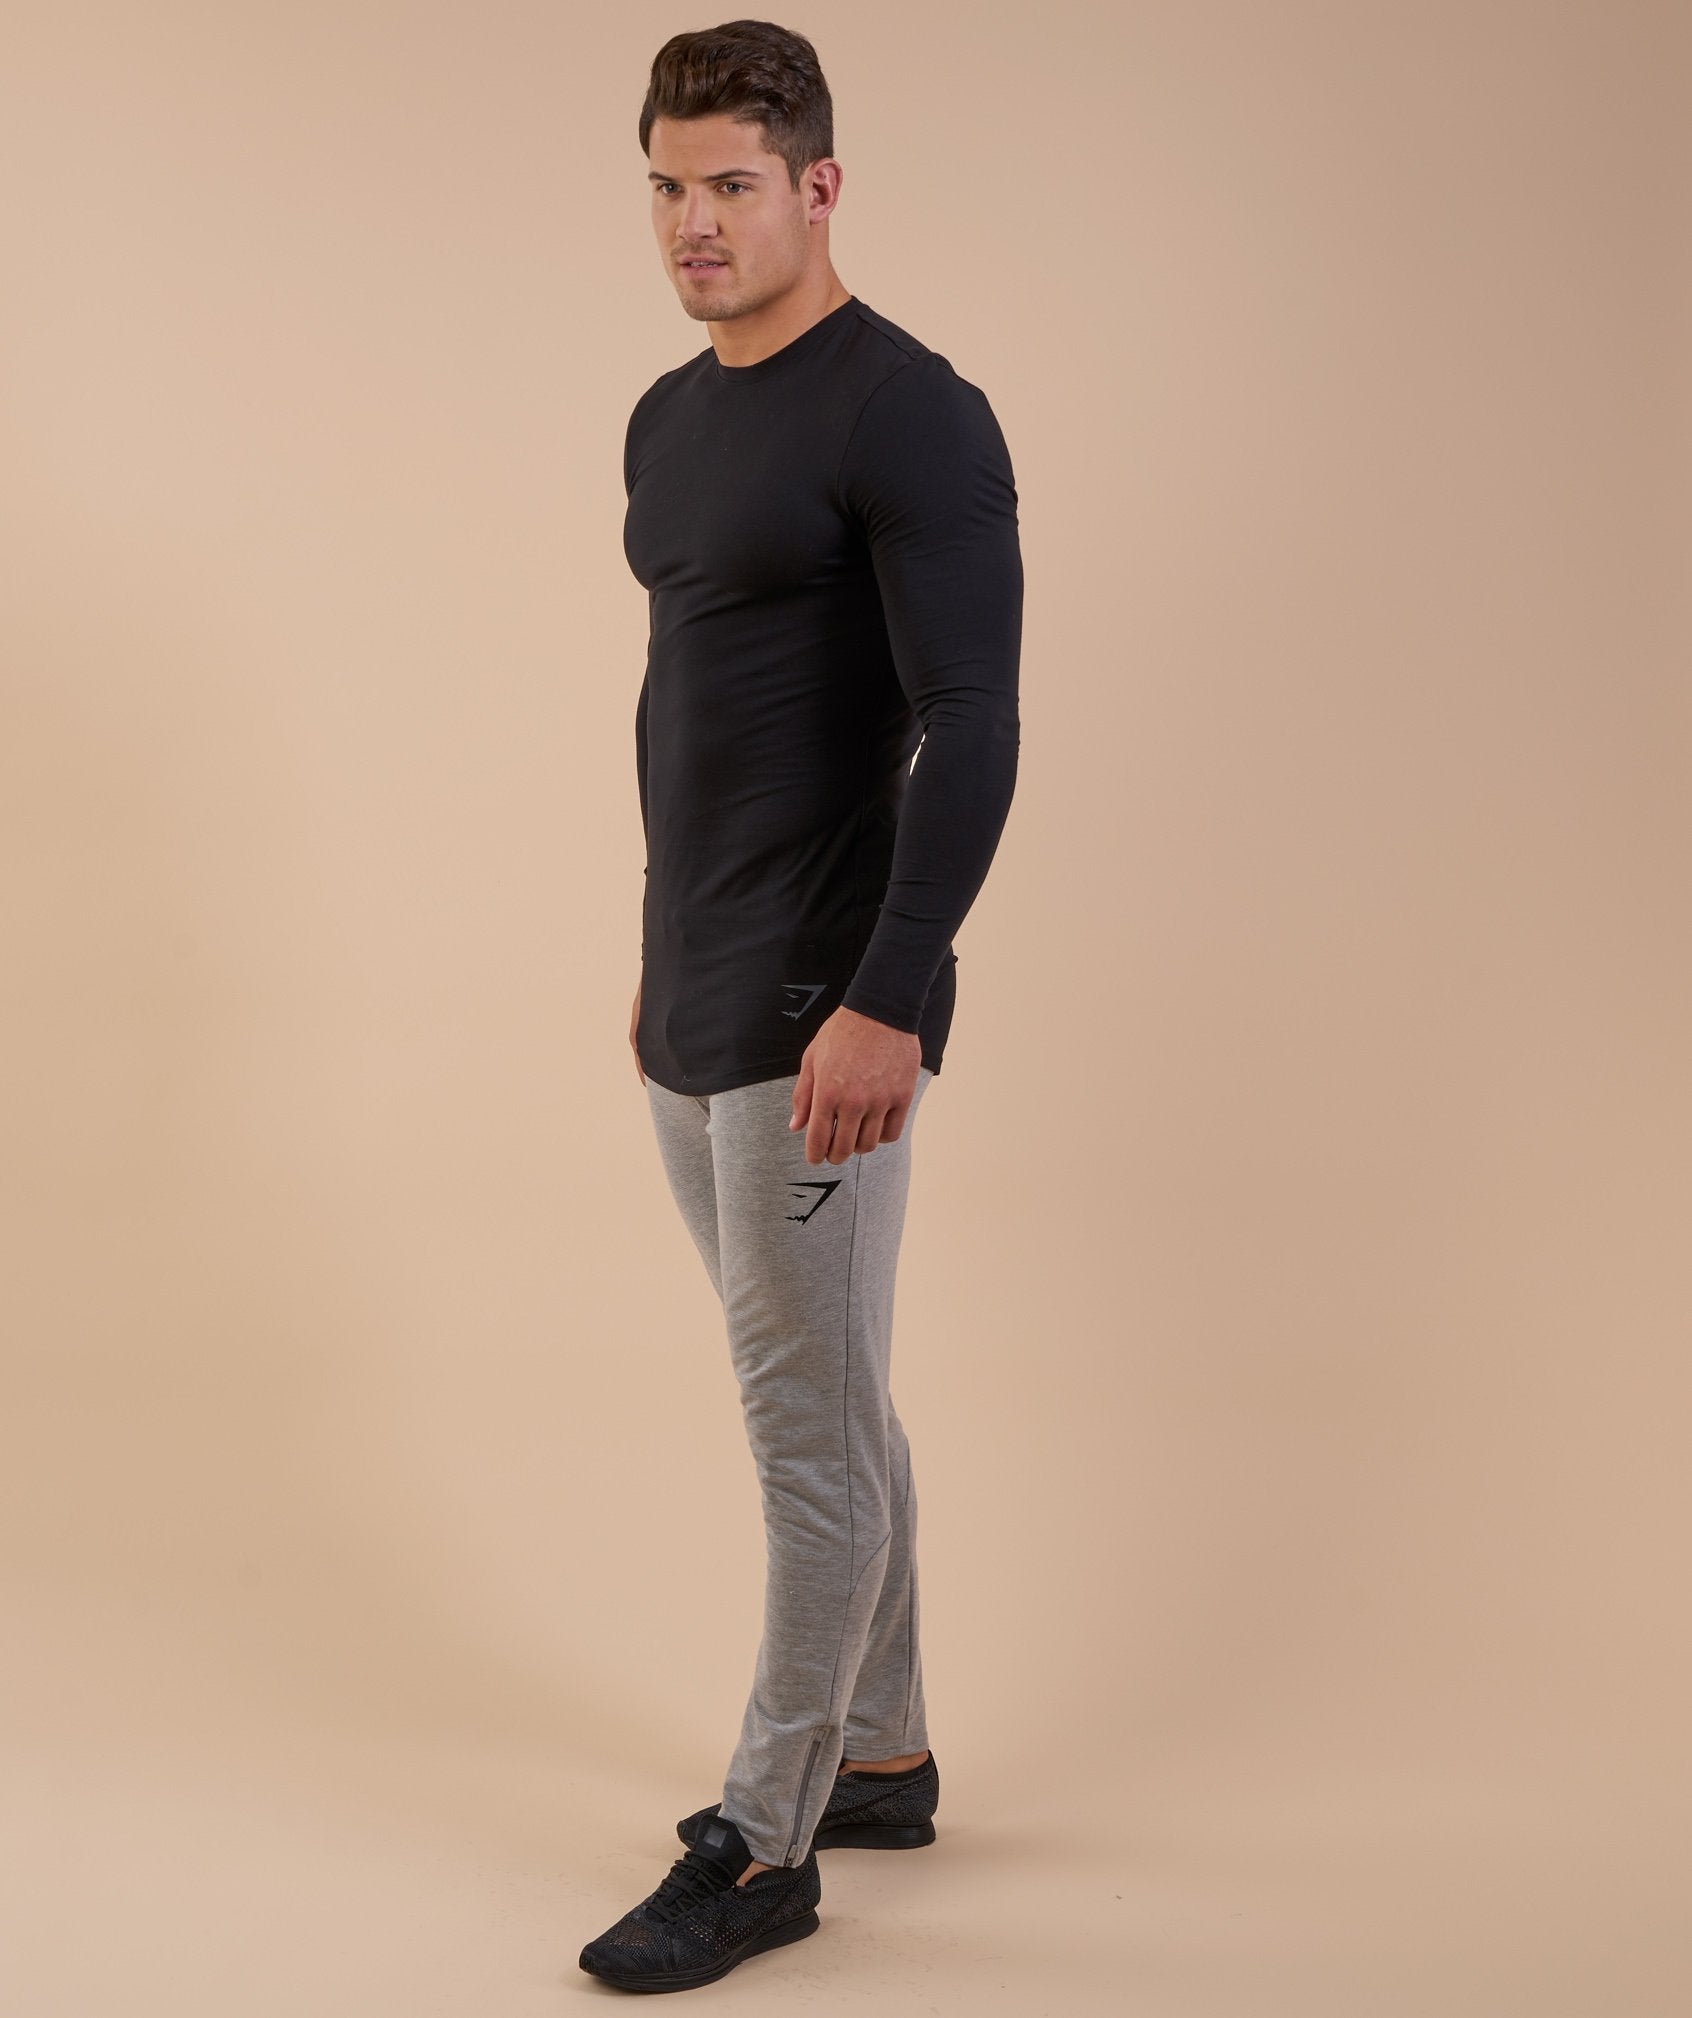 Solace Longline Long Sleeve T-shirt in Black - view 4